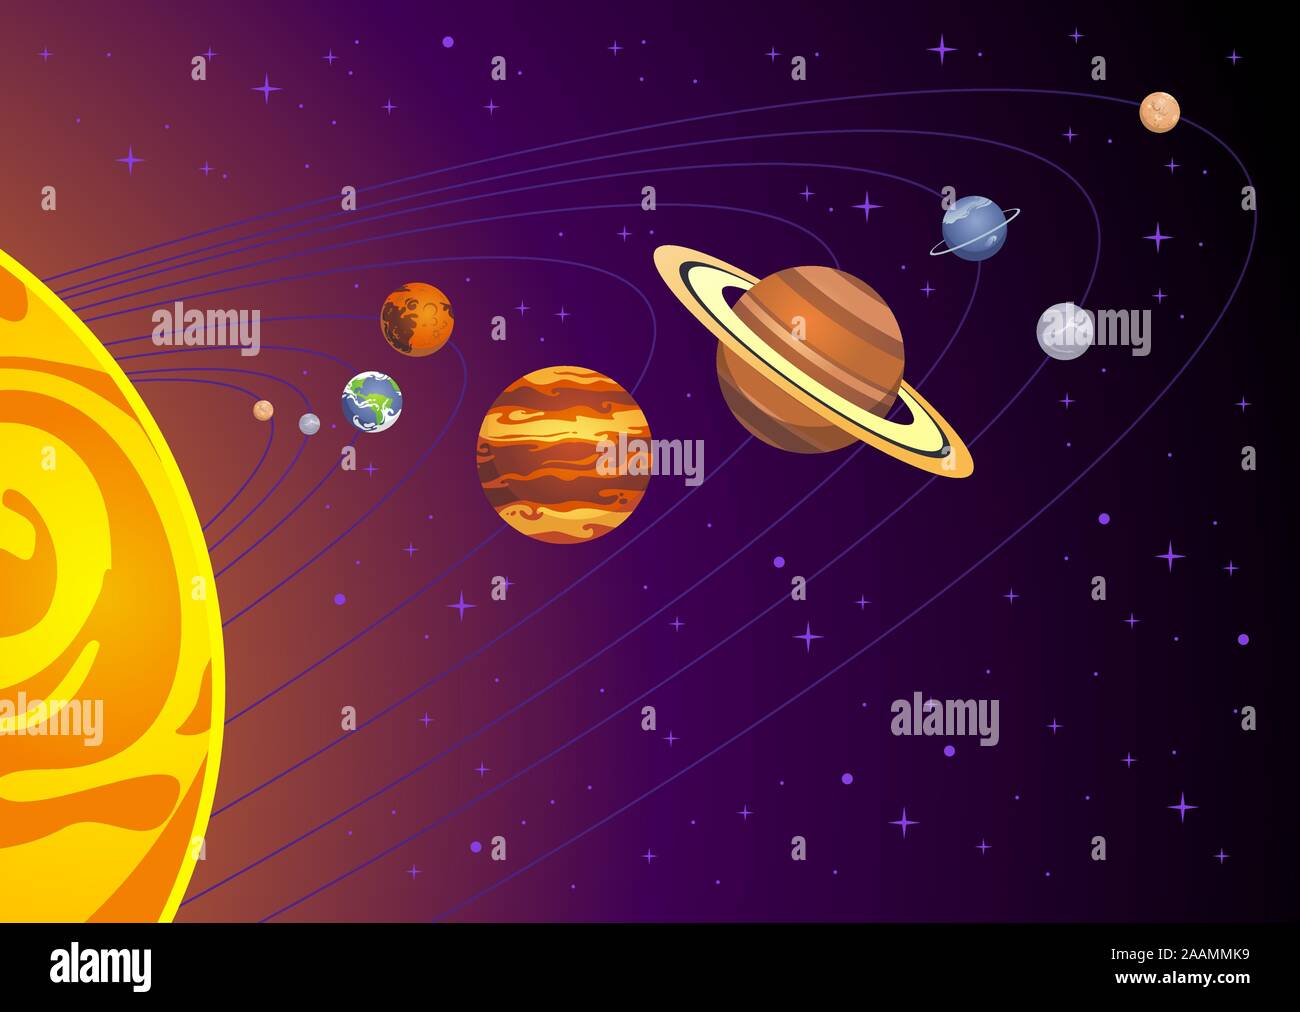 all orbit earth Stock Vector Images Alamy